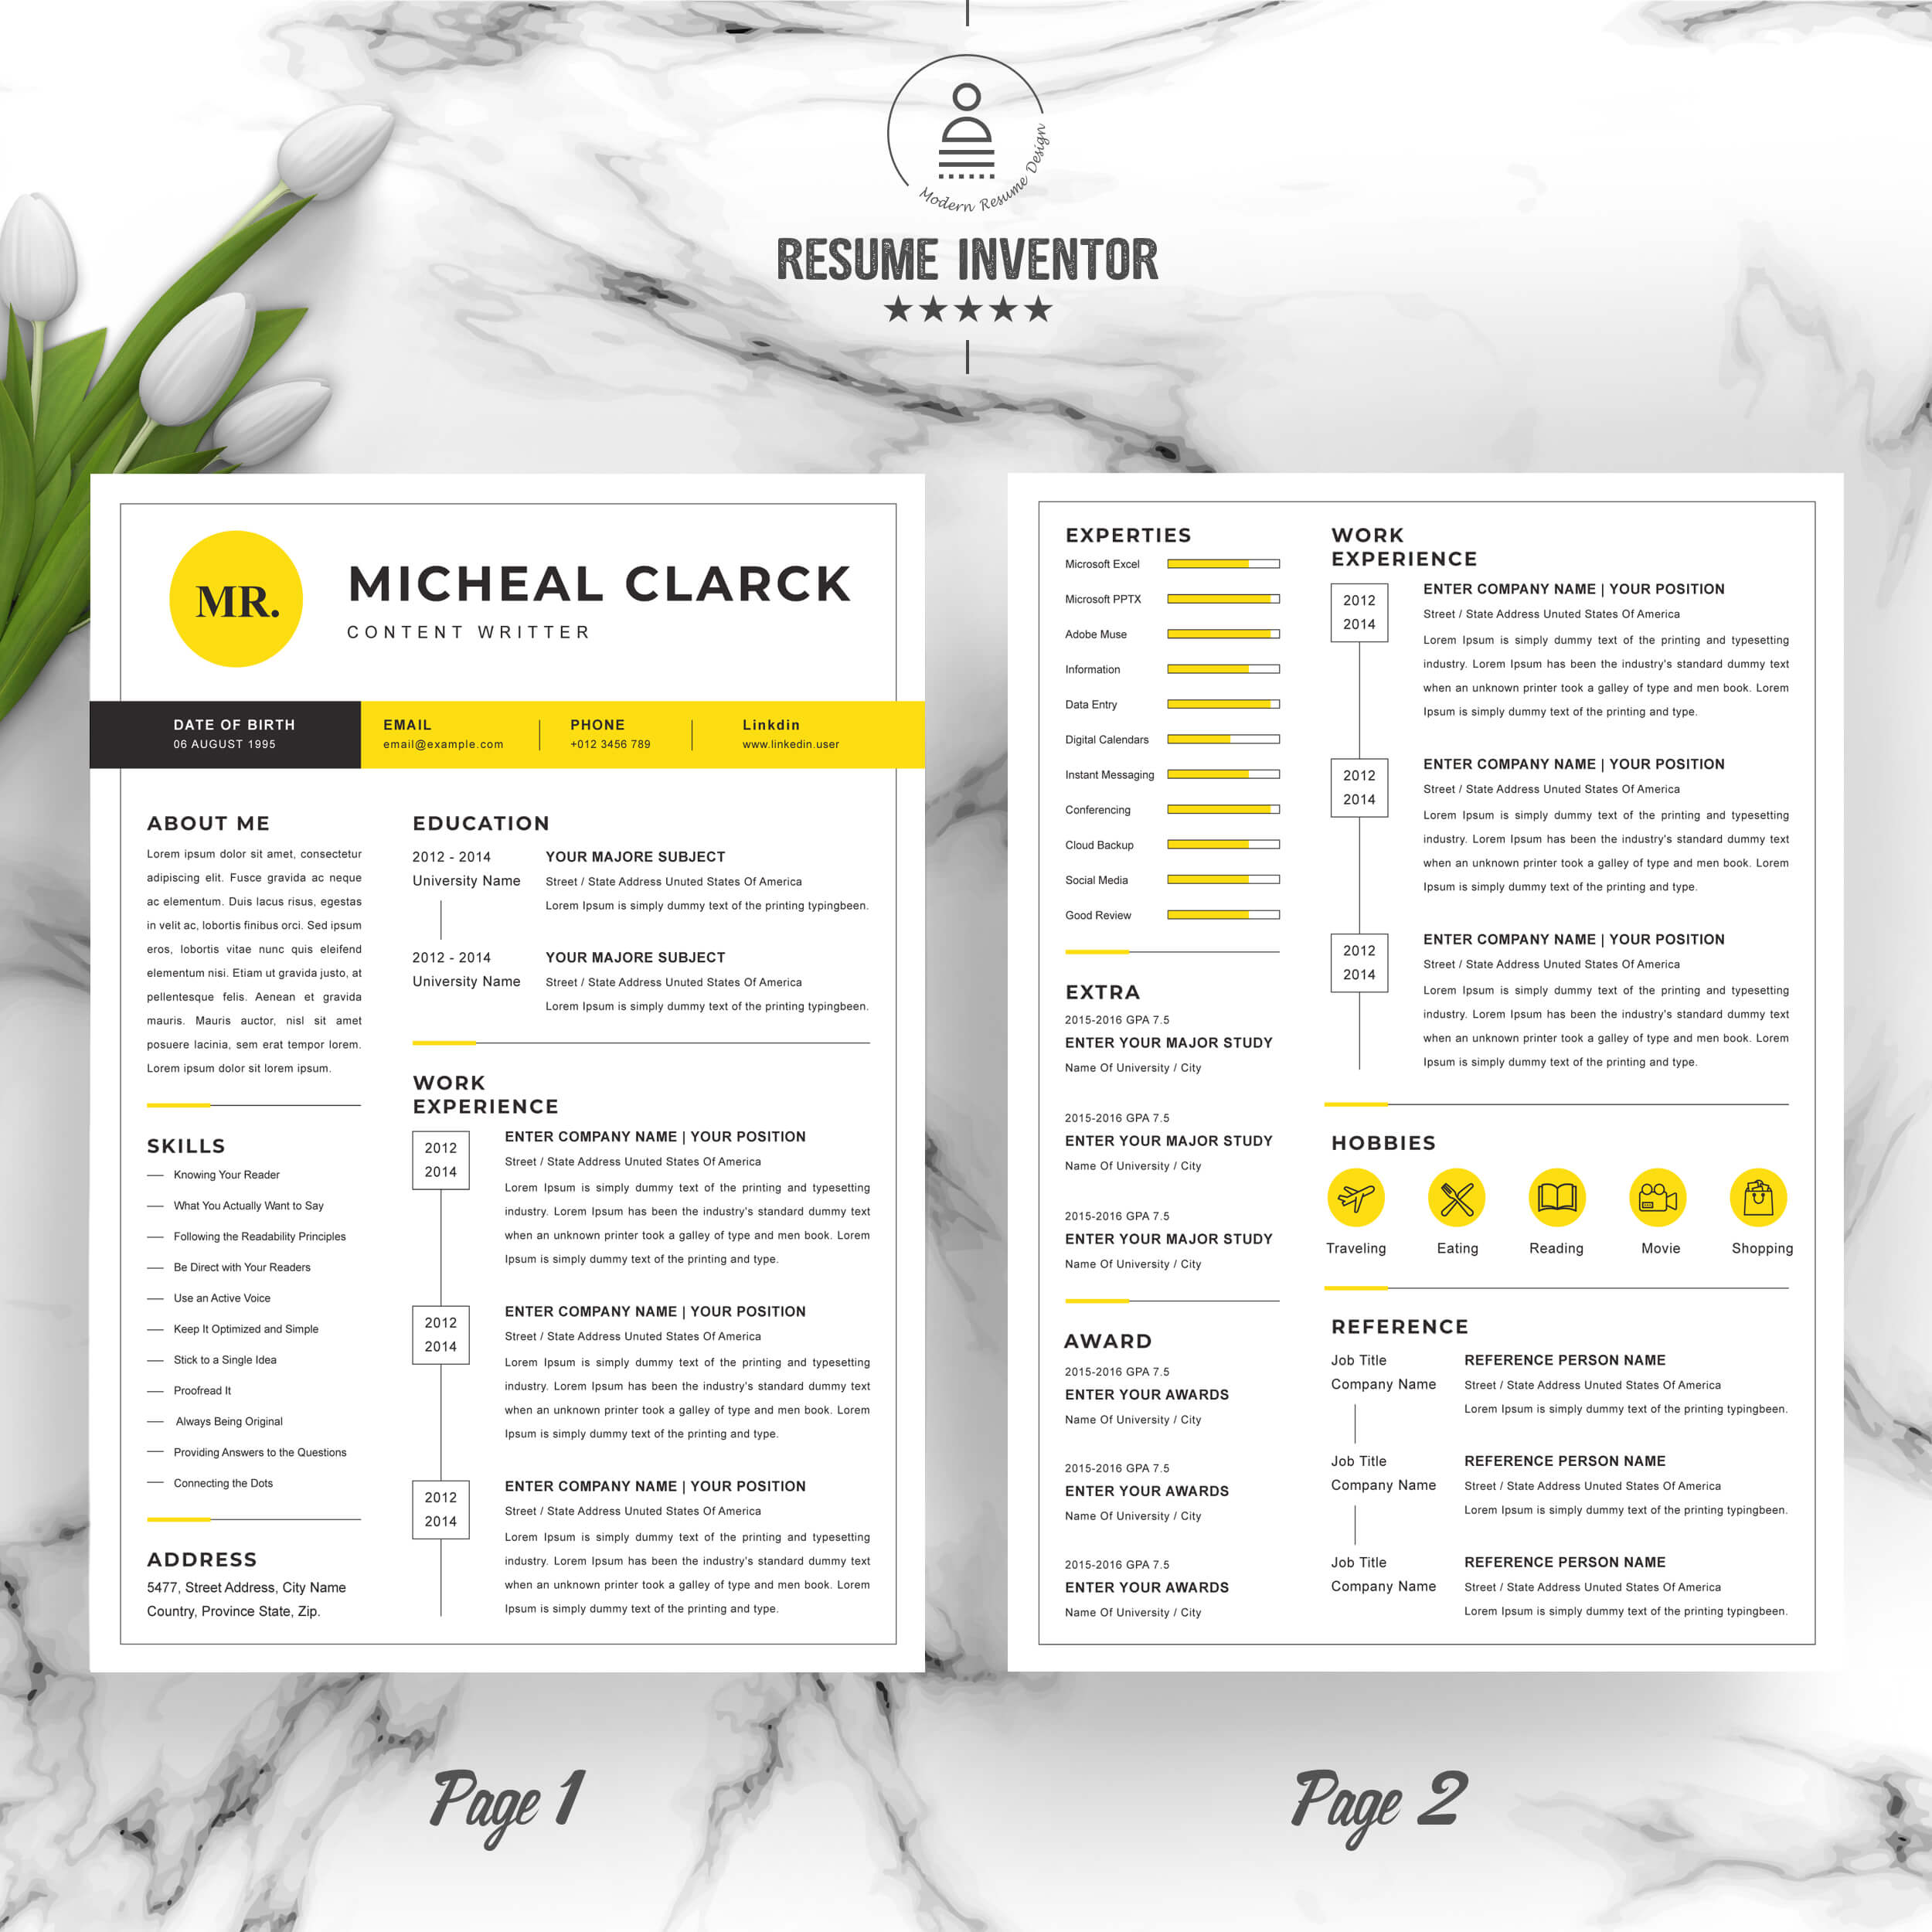 CONTENT WRITER RESUME TEMPLATE | CV TEMPLATE WORD (DOCX) FORMAT preview image.